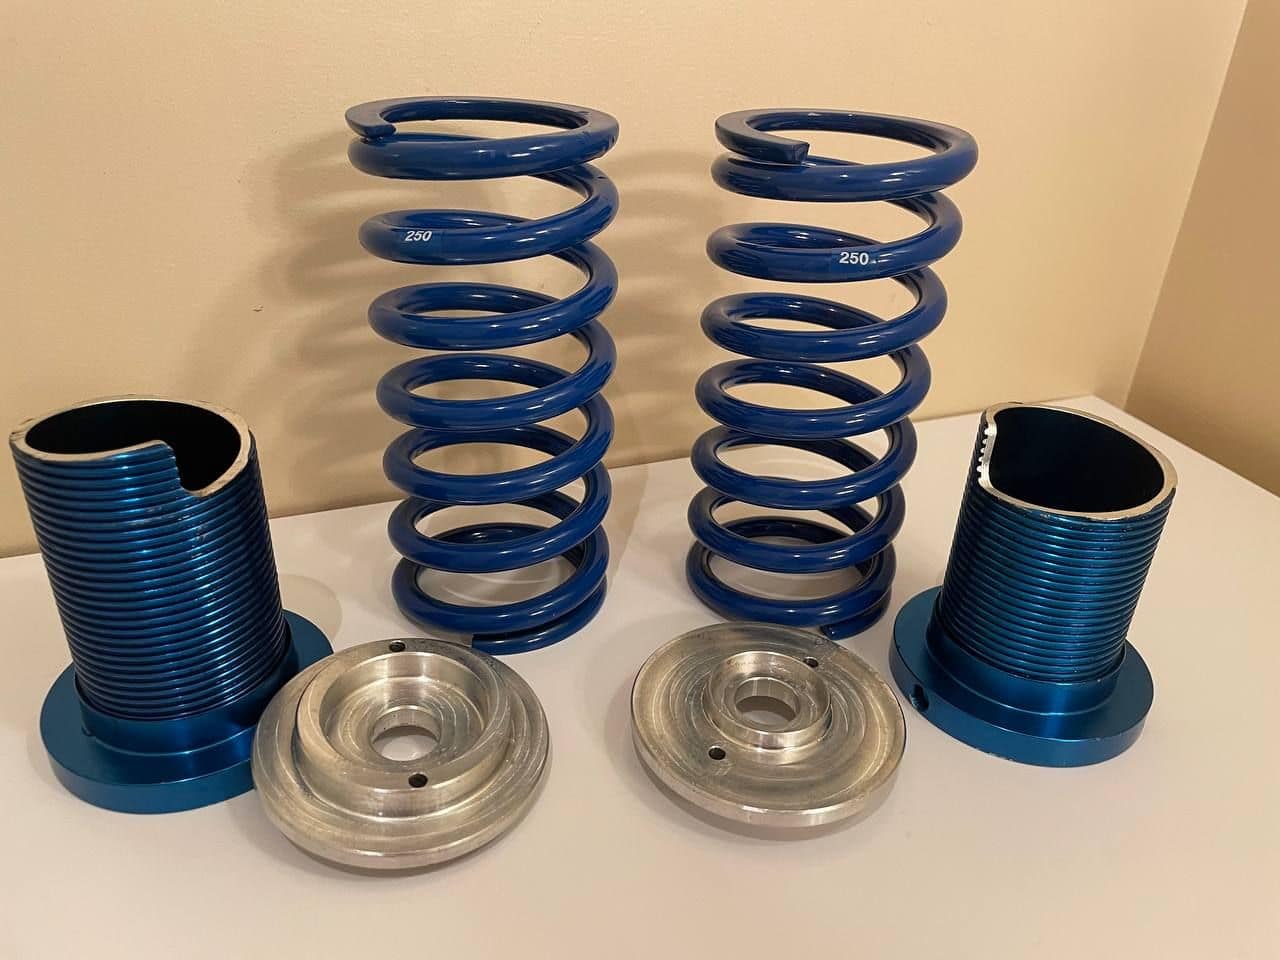 Steering/Suspension - NOS Re-Speed camber plates + street coilover setup - New - 1978 to 1985 Mazda RX-7 - St Catharines, ON L2R3N1, Canada